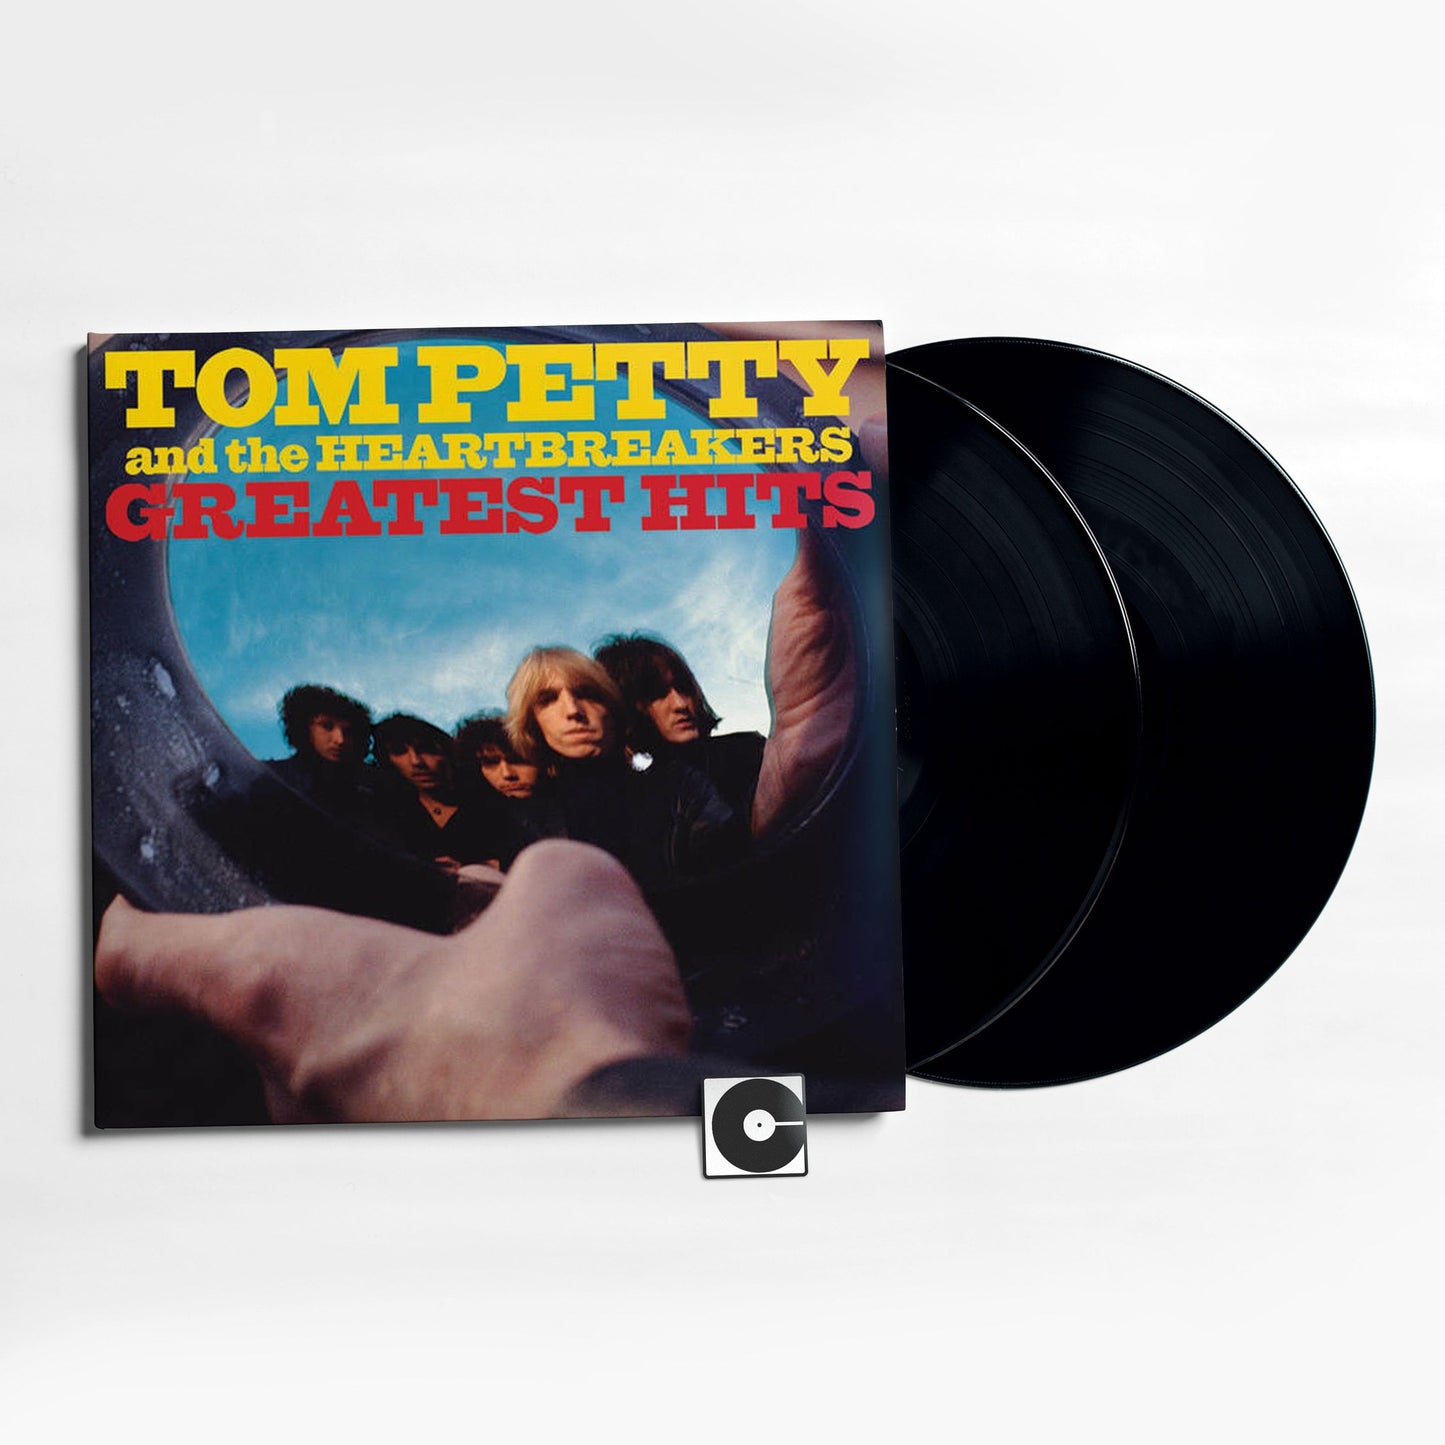 Tom Petty & The Heartbreakers - "Greatest Hits"